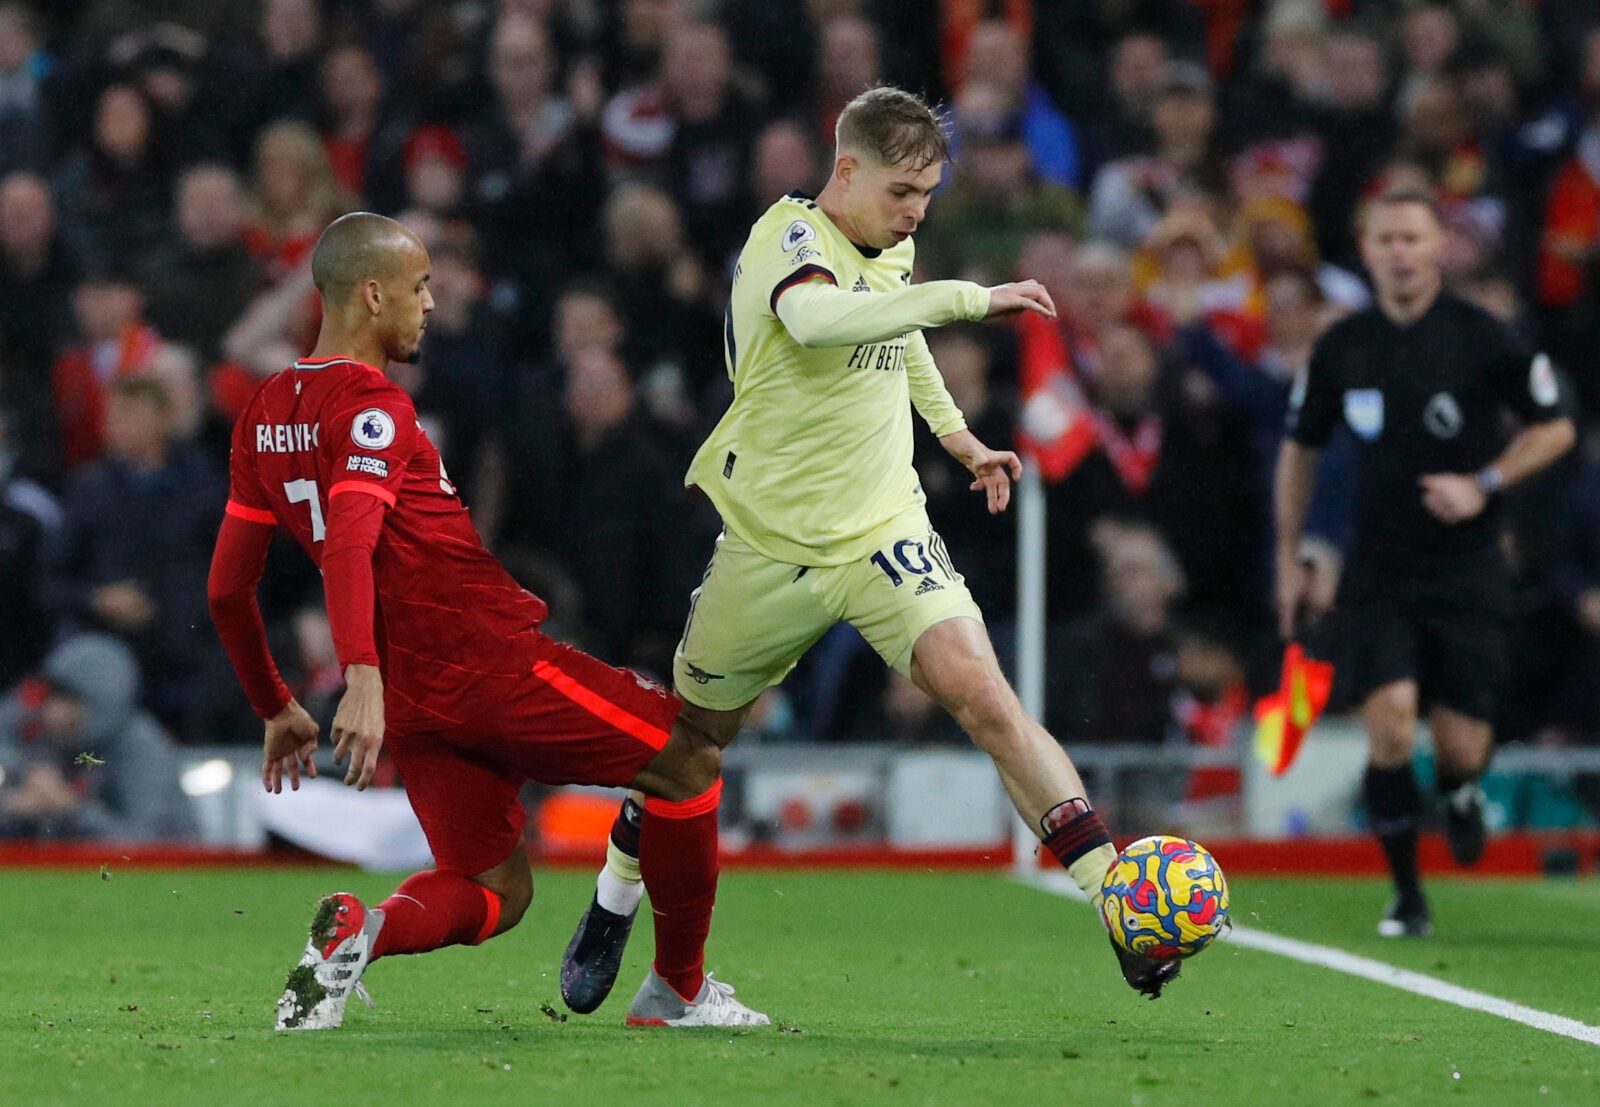 Soccer Football - Premier League - Liverpool v Arsenal - Anfield, Liverpool, Britain - November 20, 2021 Liverpool's Fabinho in action with Arsenal's Emile Smith Rowe Action Images via Reuters/Phil Noble EDITORIAL USE ONLY. No use with unauthorized audio, video, data, fixture lists, club/league logos or 'live' services. Online in-match use limited to 75 images, no video emulation. No use in betting, games or single club /league/player publications.  Please contact your account representative for